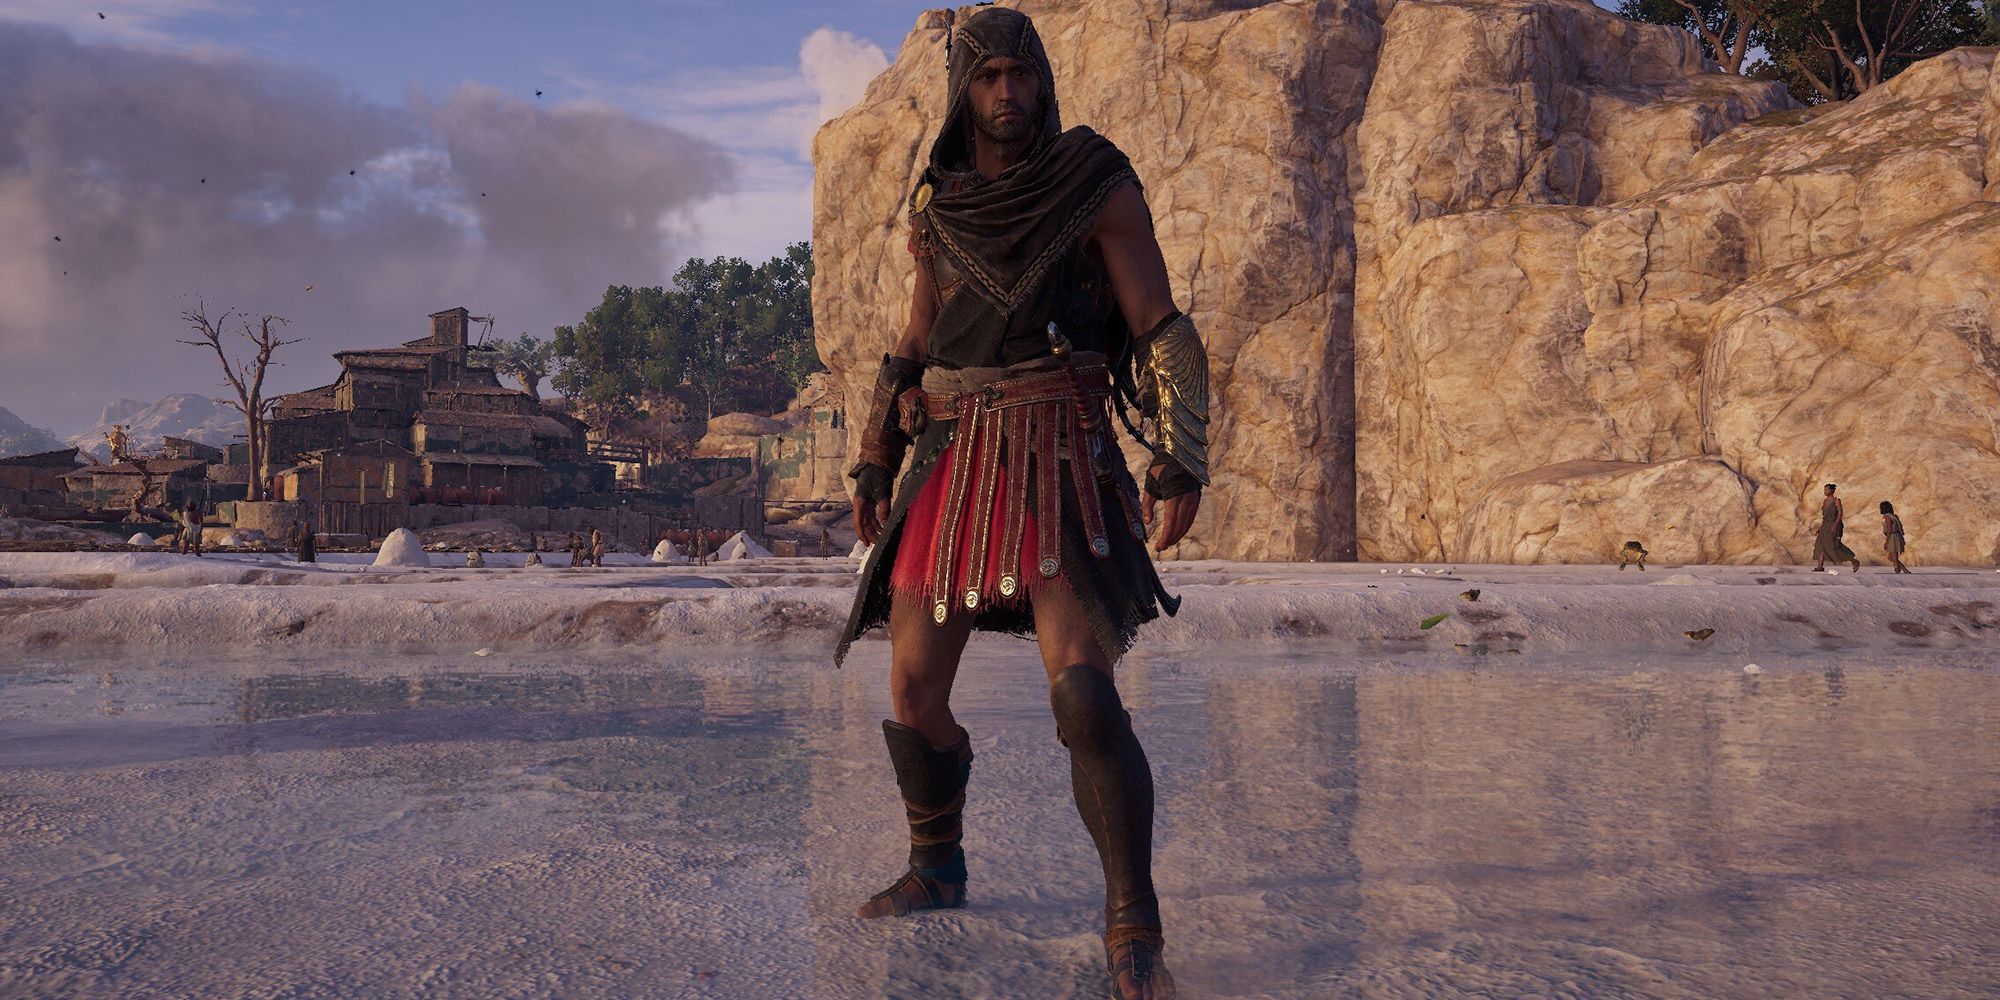 Assassin's Creed Odyssey - Alexios Standing In The Pirate Armor Set